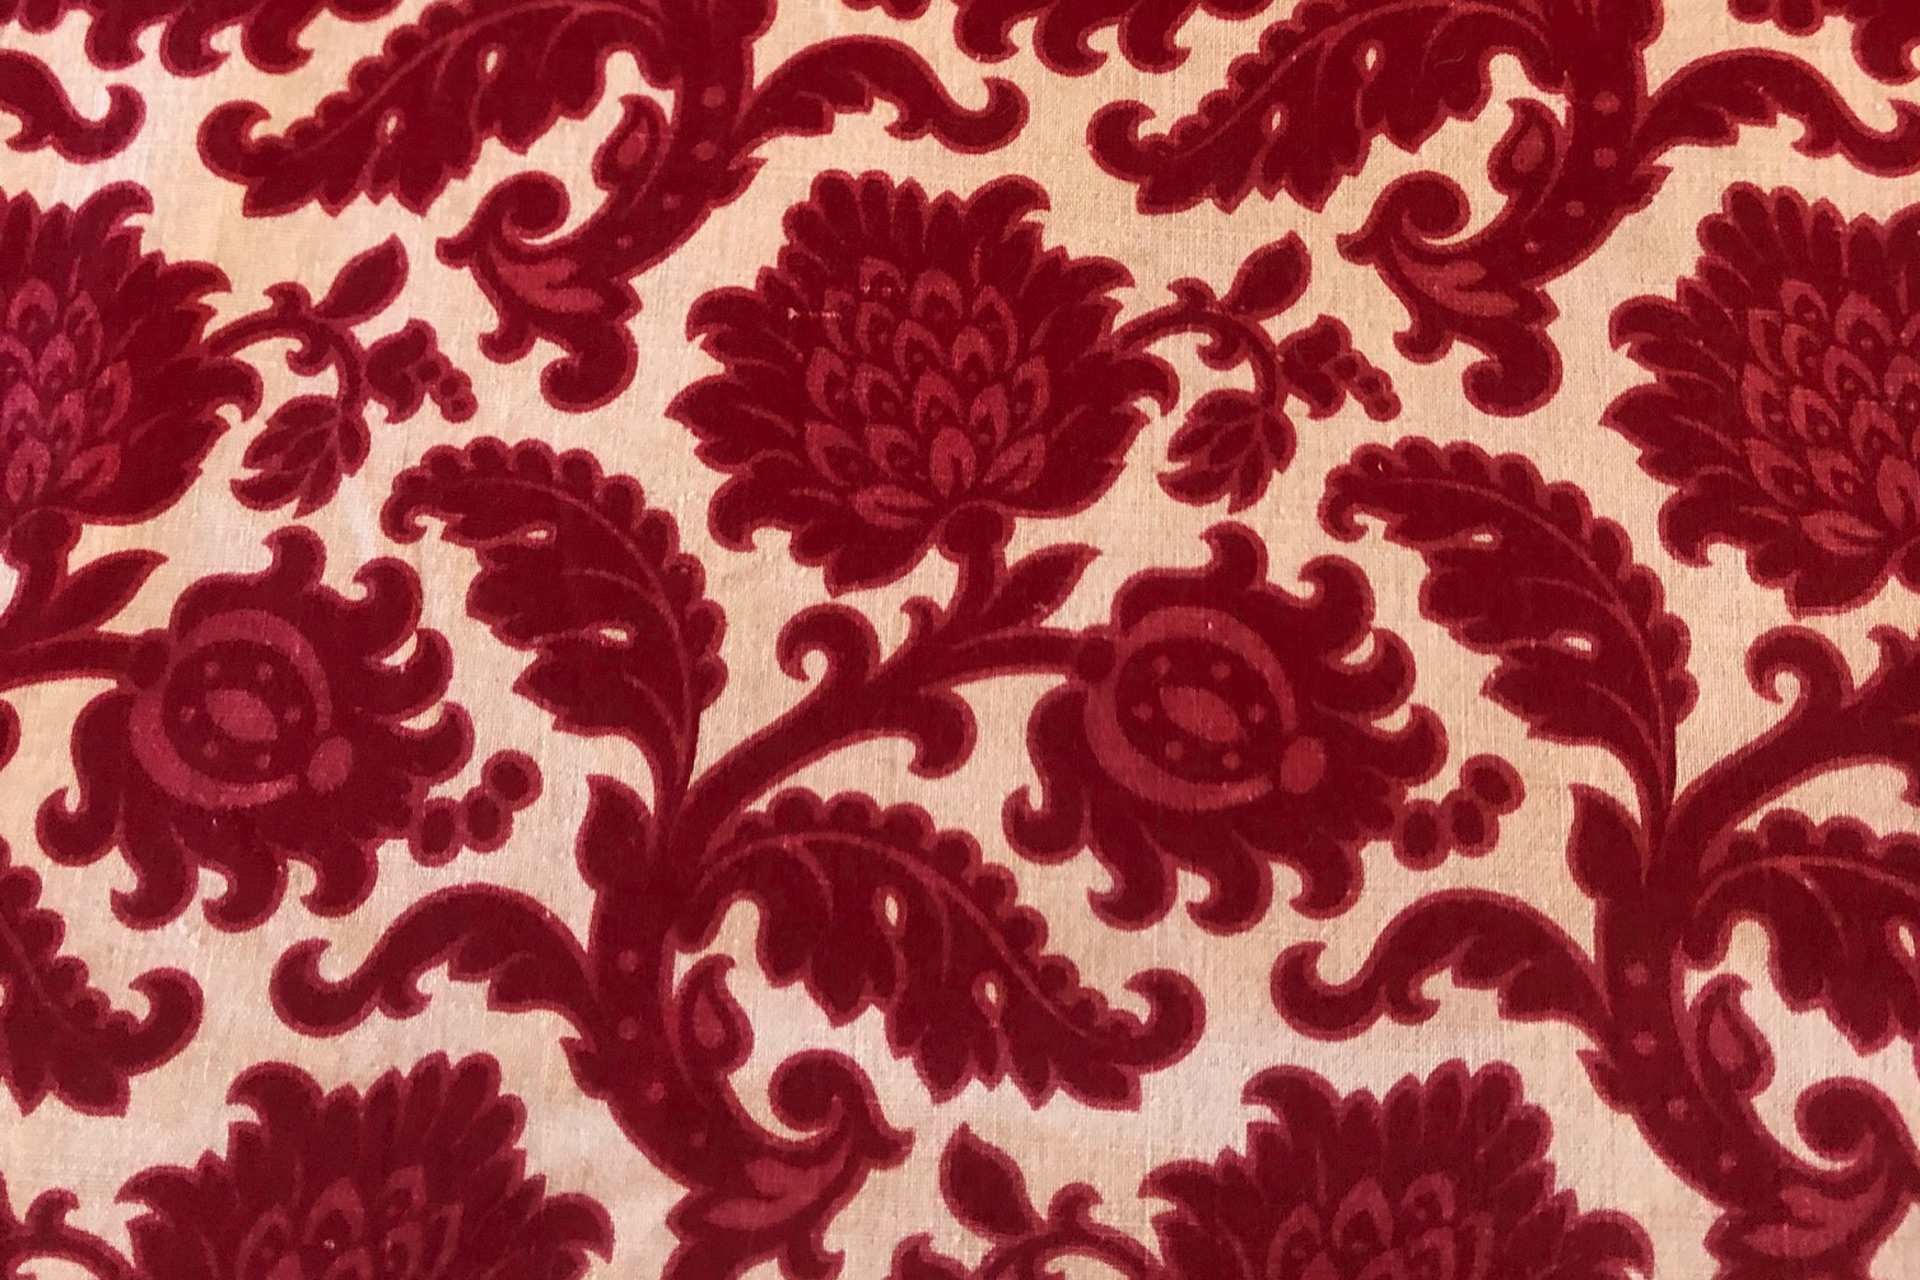 Red and white paisley-patterned fabric.